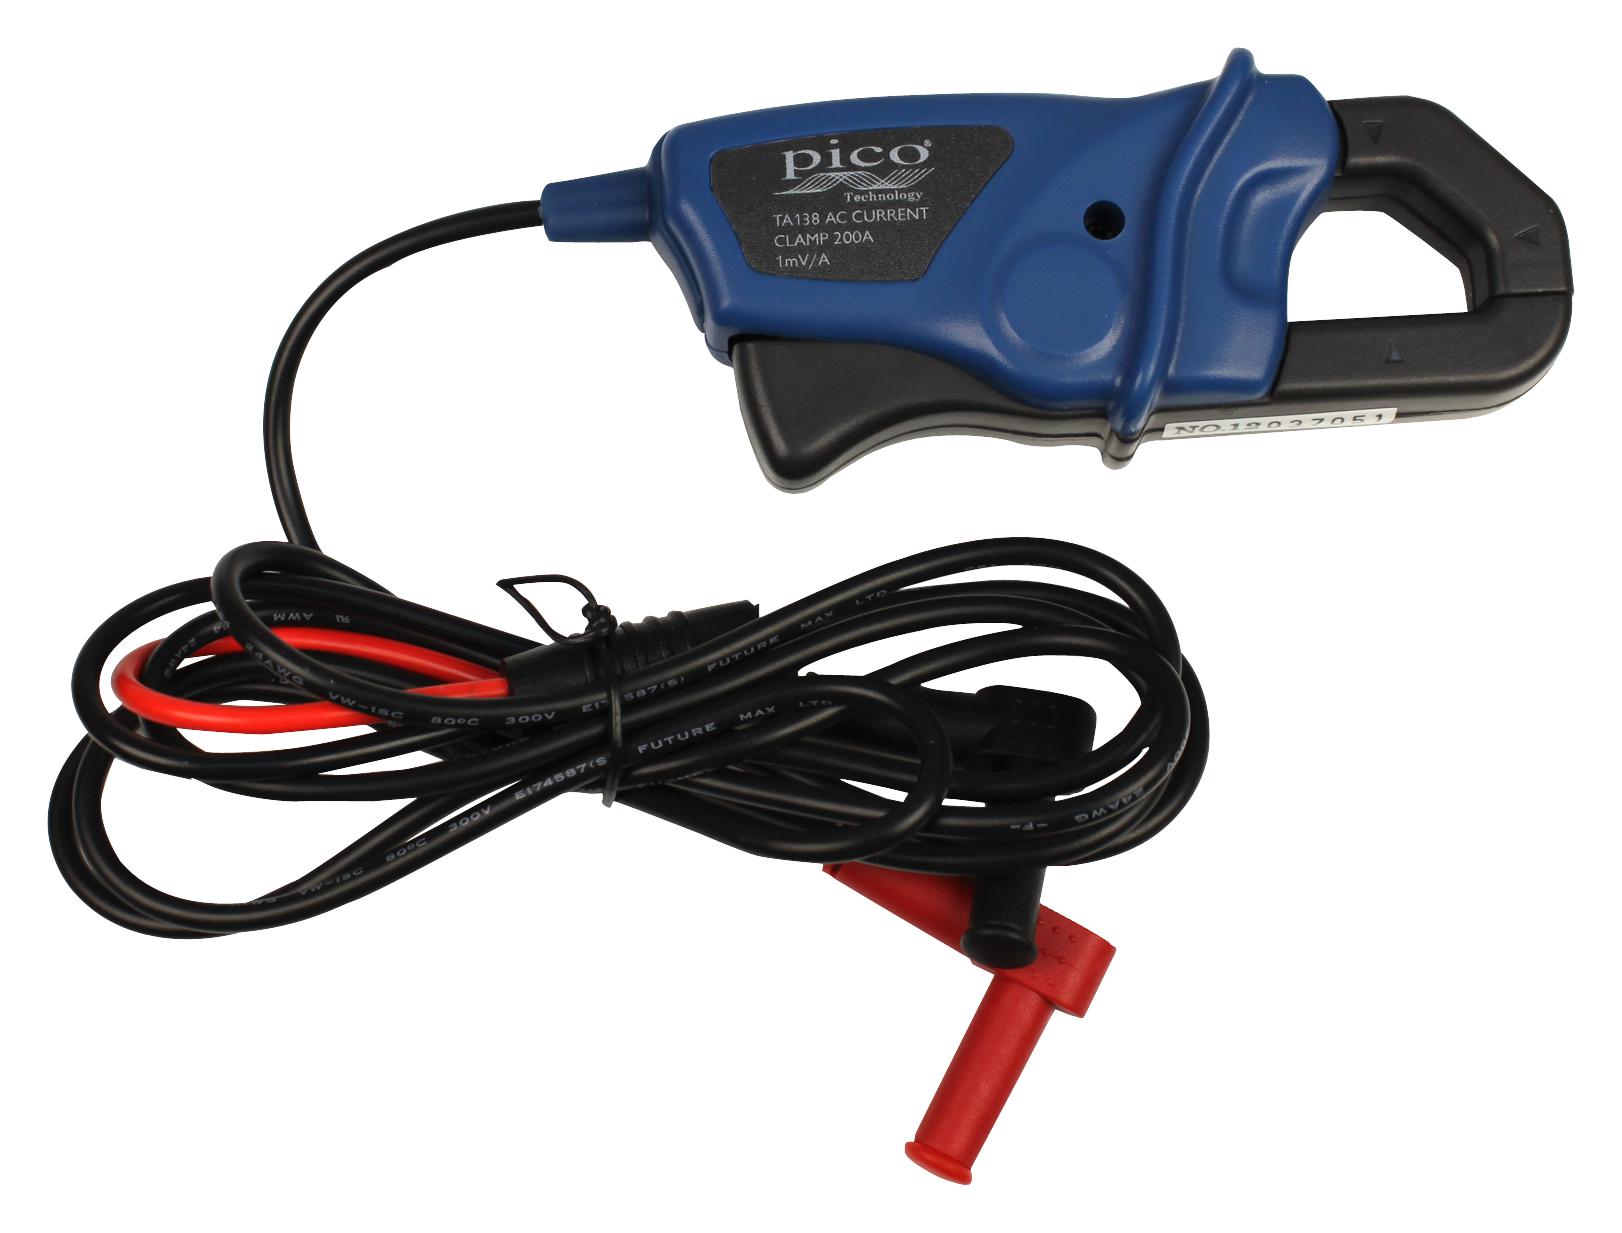 TA138 AC CURRENT CLAMP PROBE, 0-200A PICO TECHNOLOGY